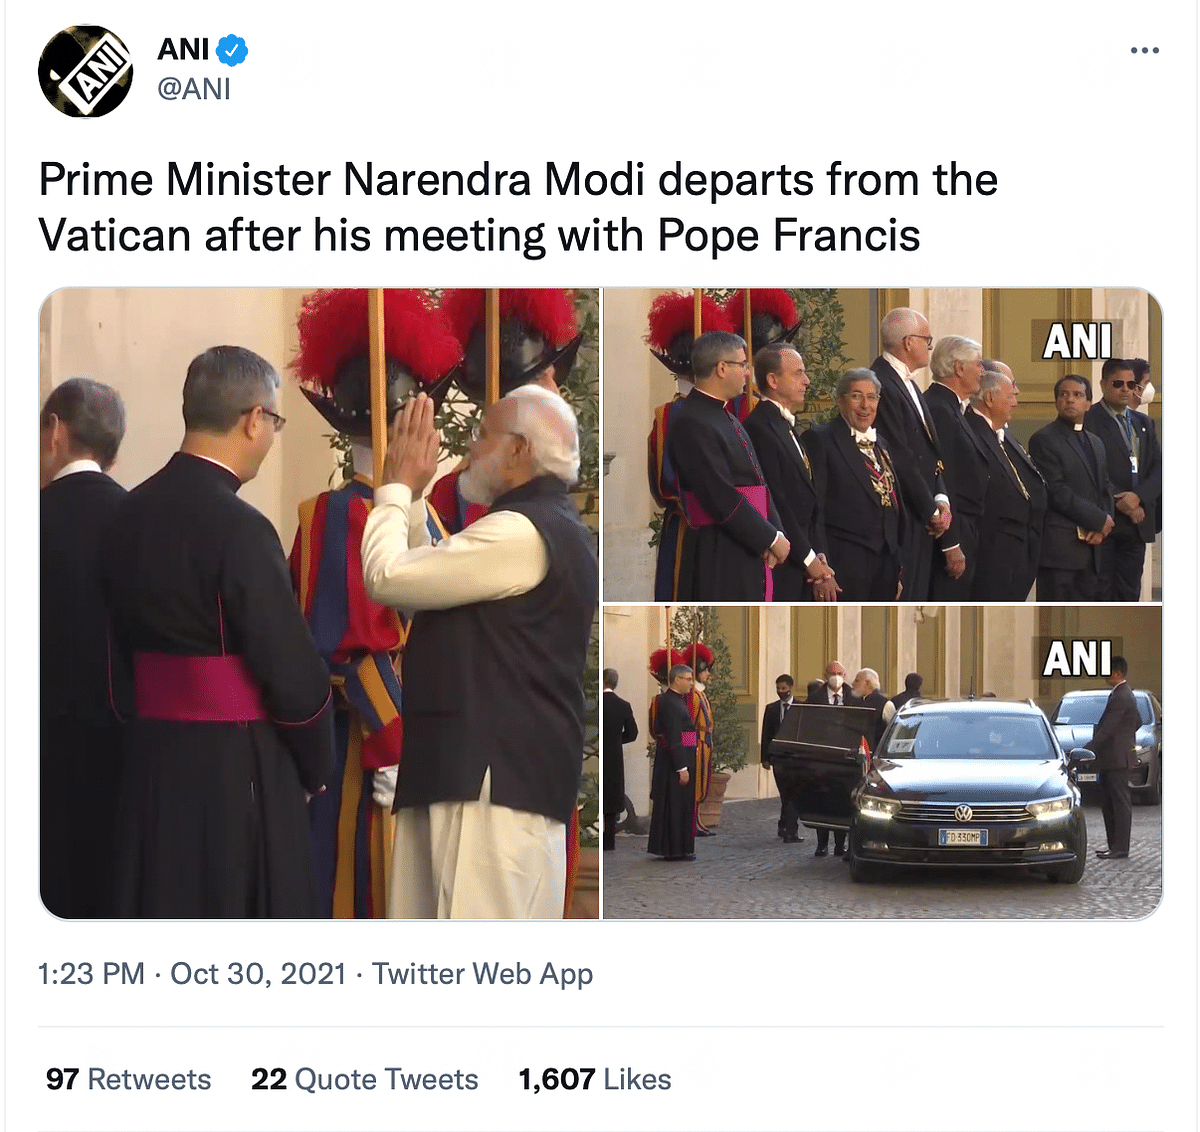 Both photos of PM Modi's visit to the Vatican were morphed to make the convoy look like taxis.